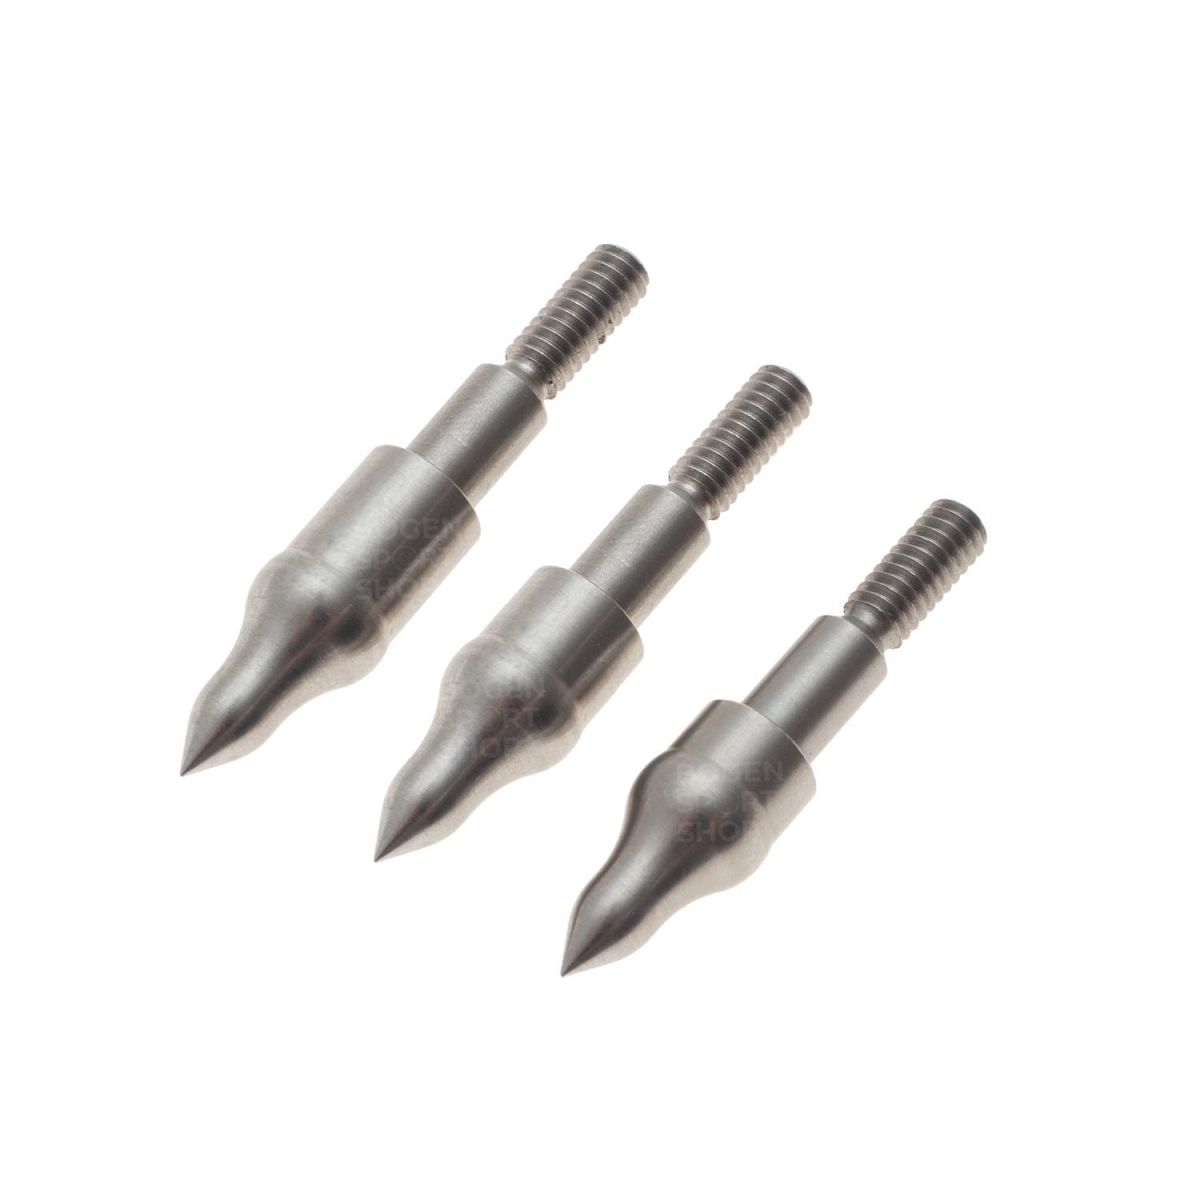 Gold Tip Screw-In Points Combo .246 - 5/16"